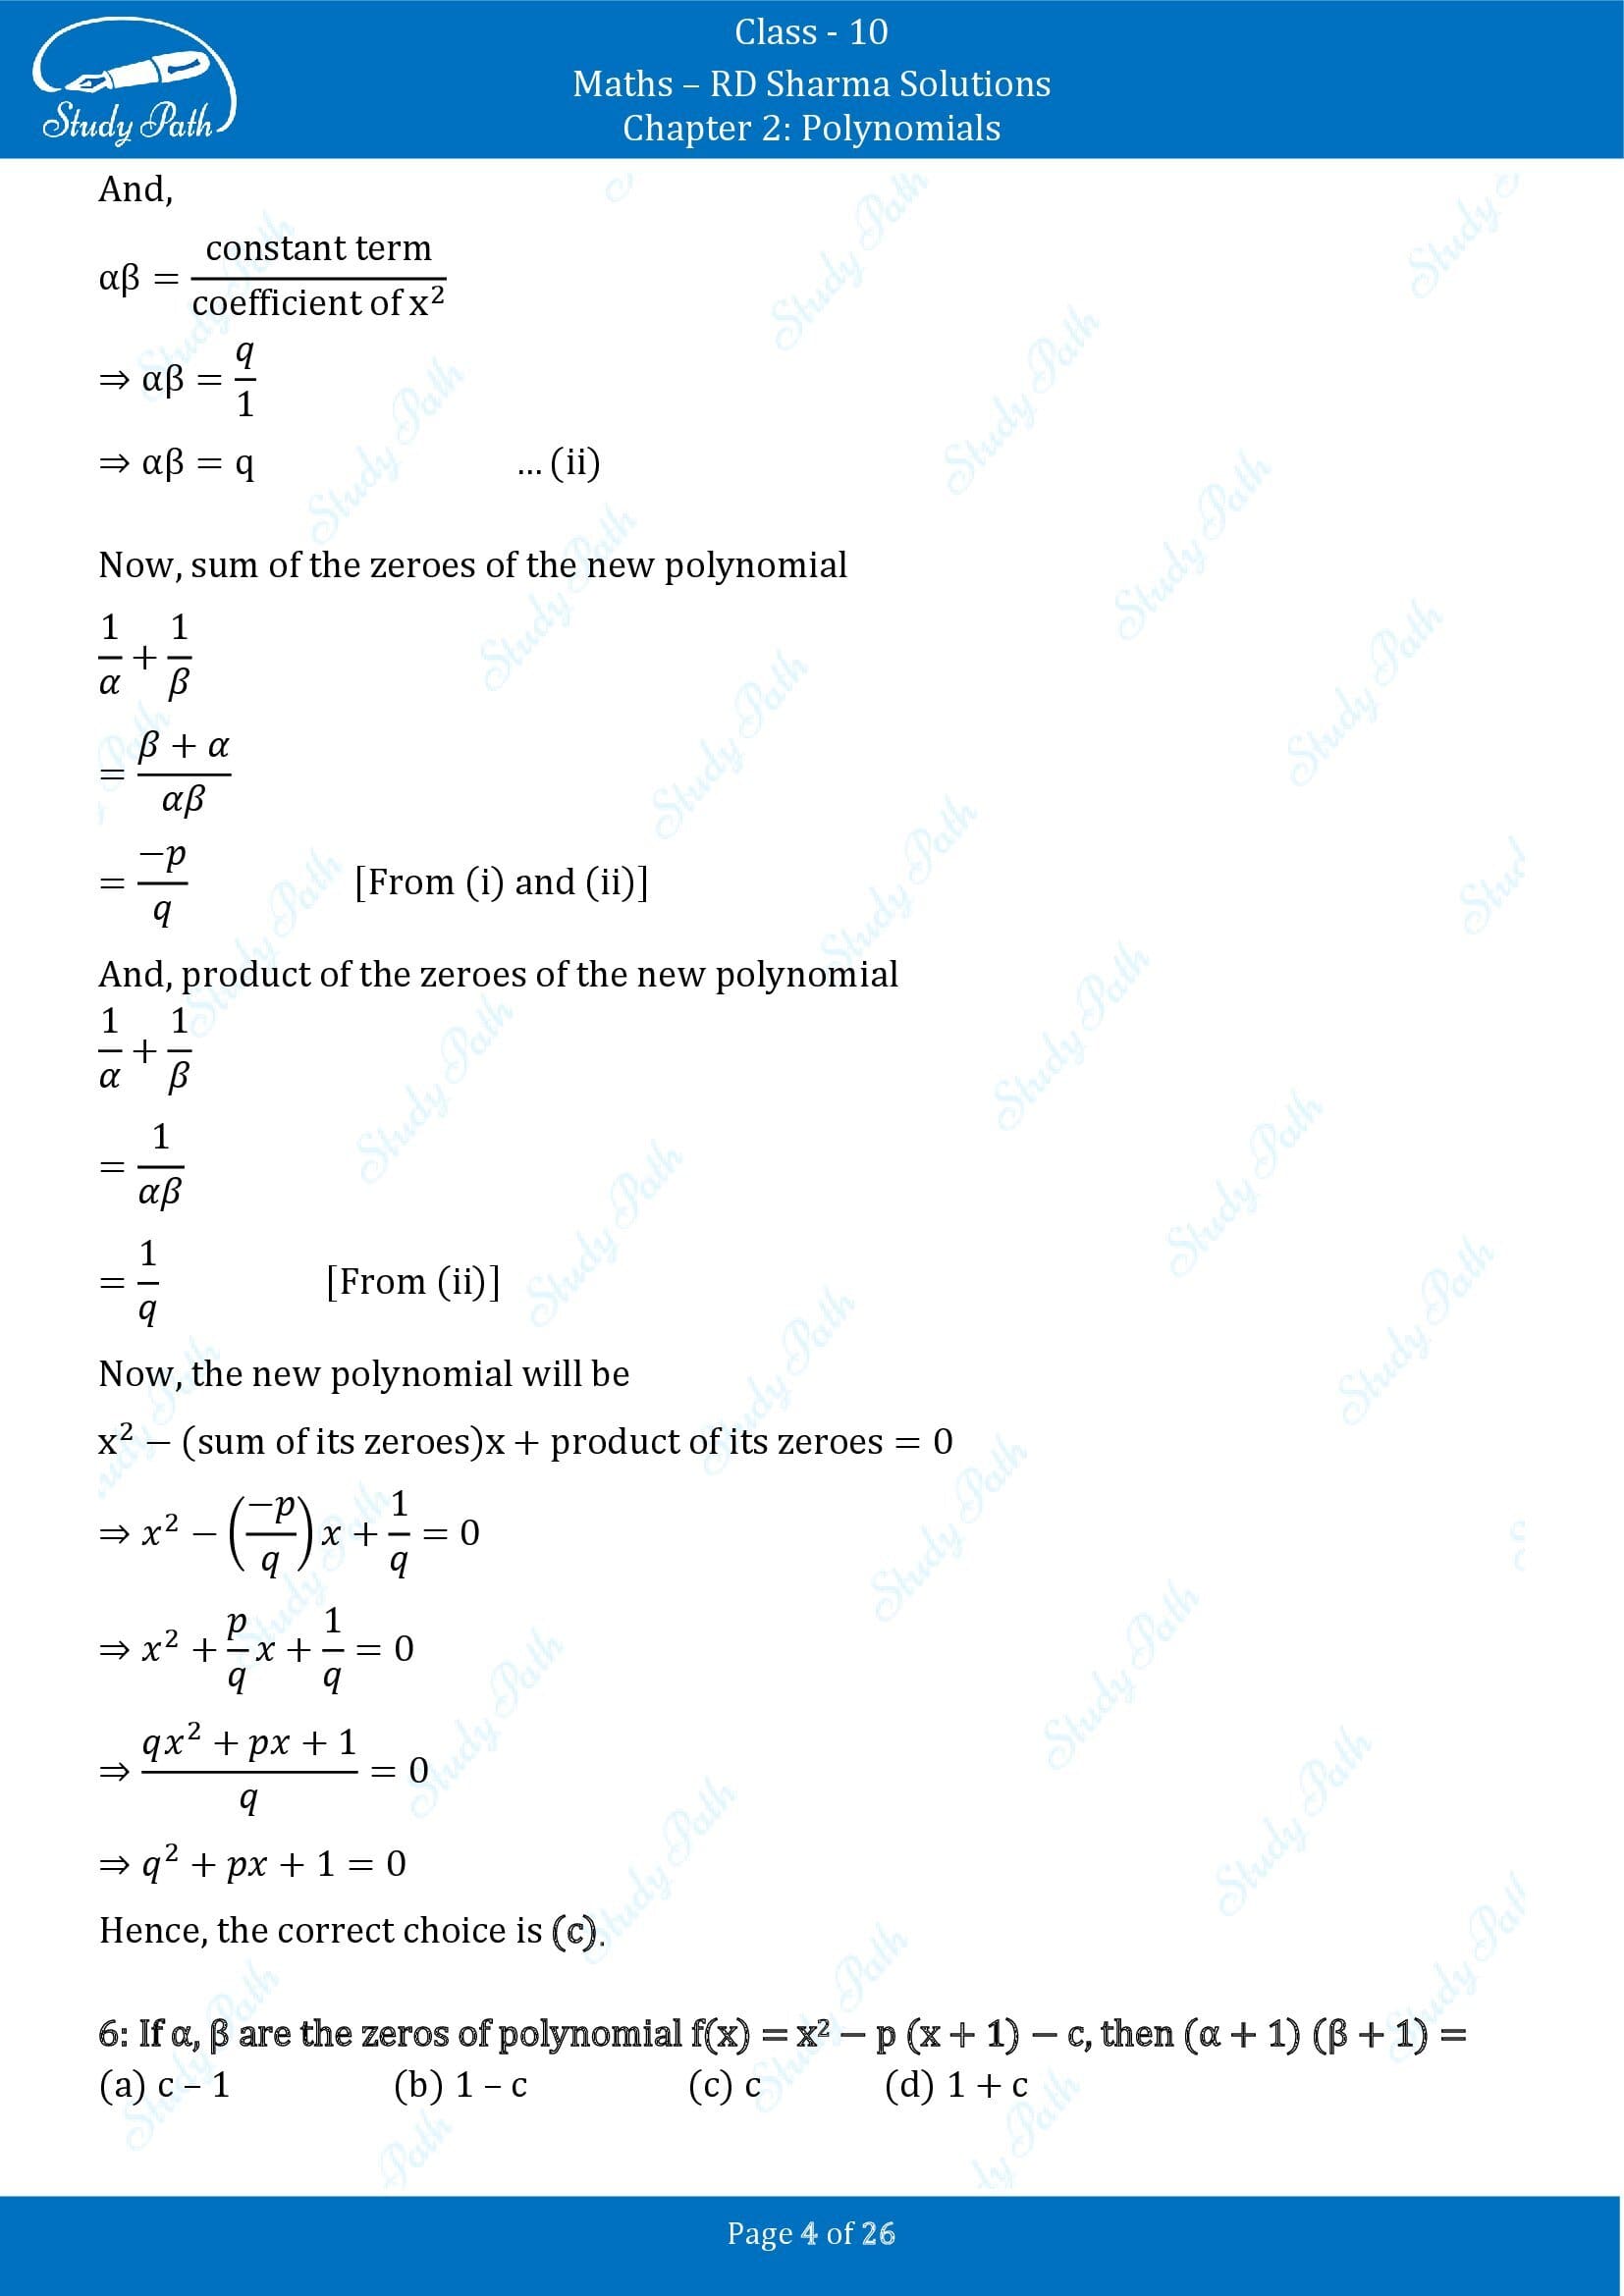 RD Sharma Solutions Class 10 Chapter 2 Polynomials Multiple Choice Questions MCQs 00004